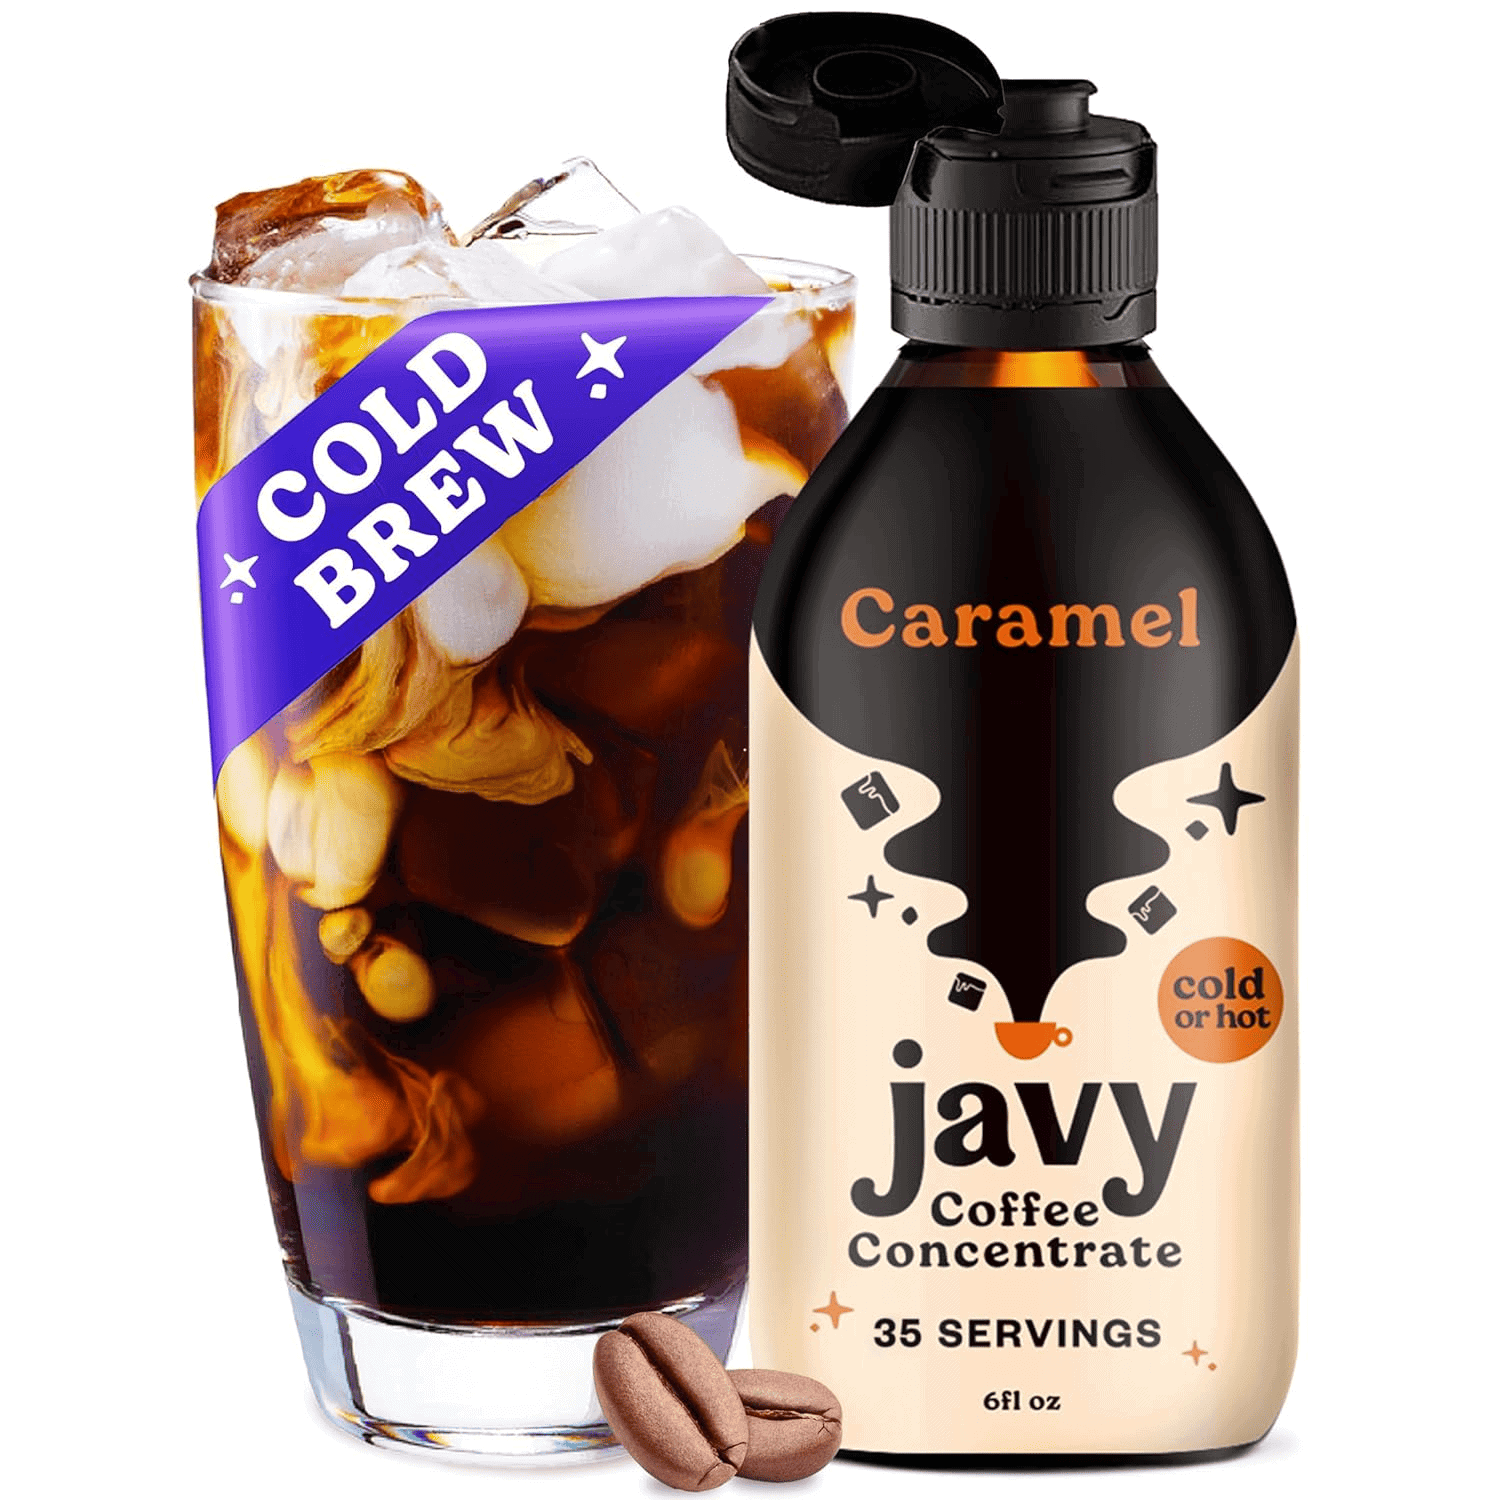 A bottle of Javy Coffee Concentrate